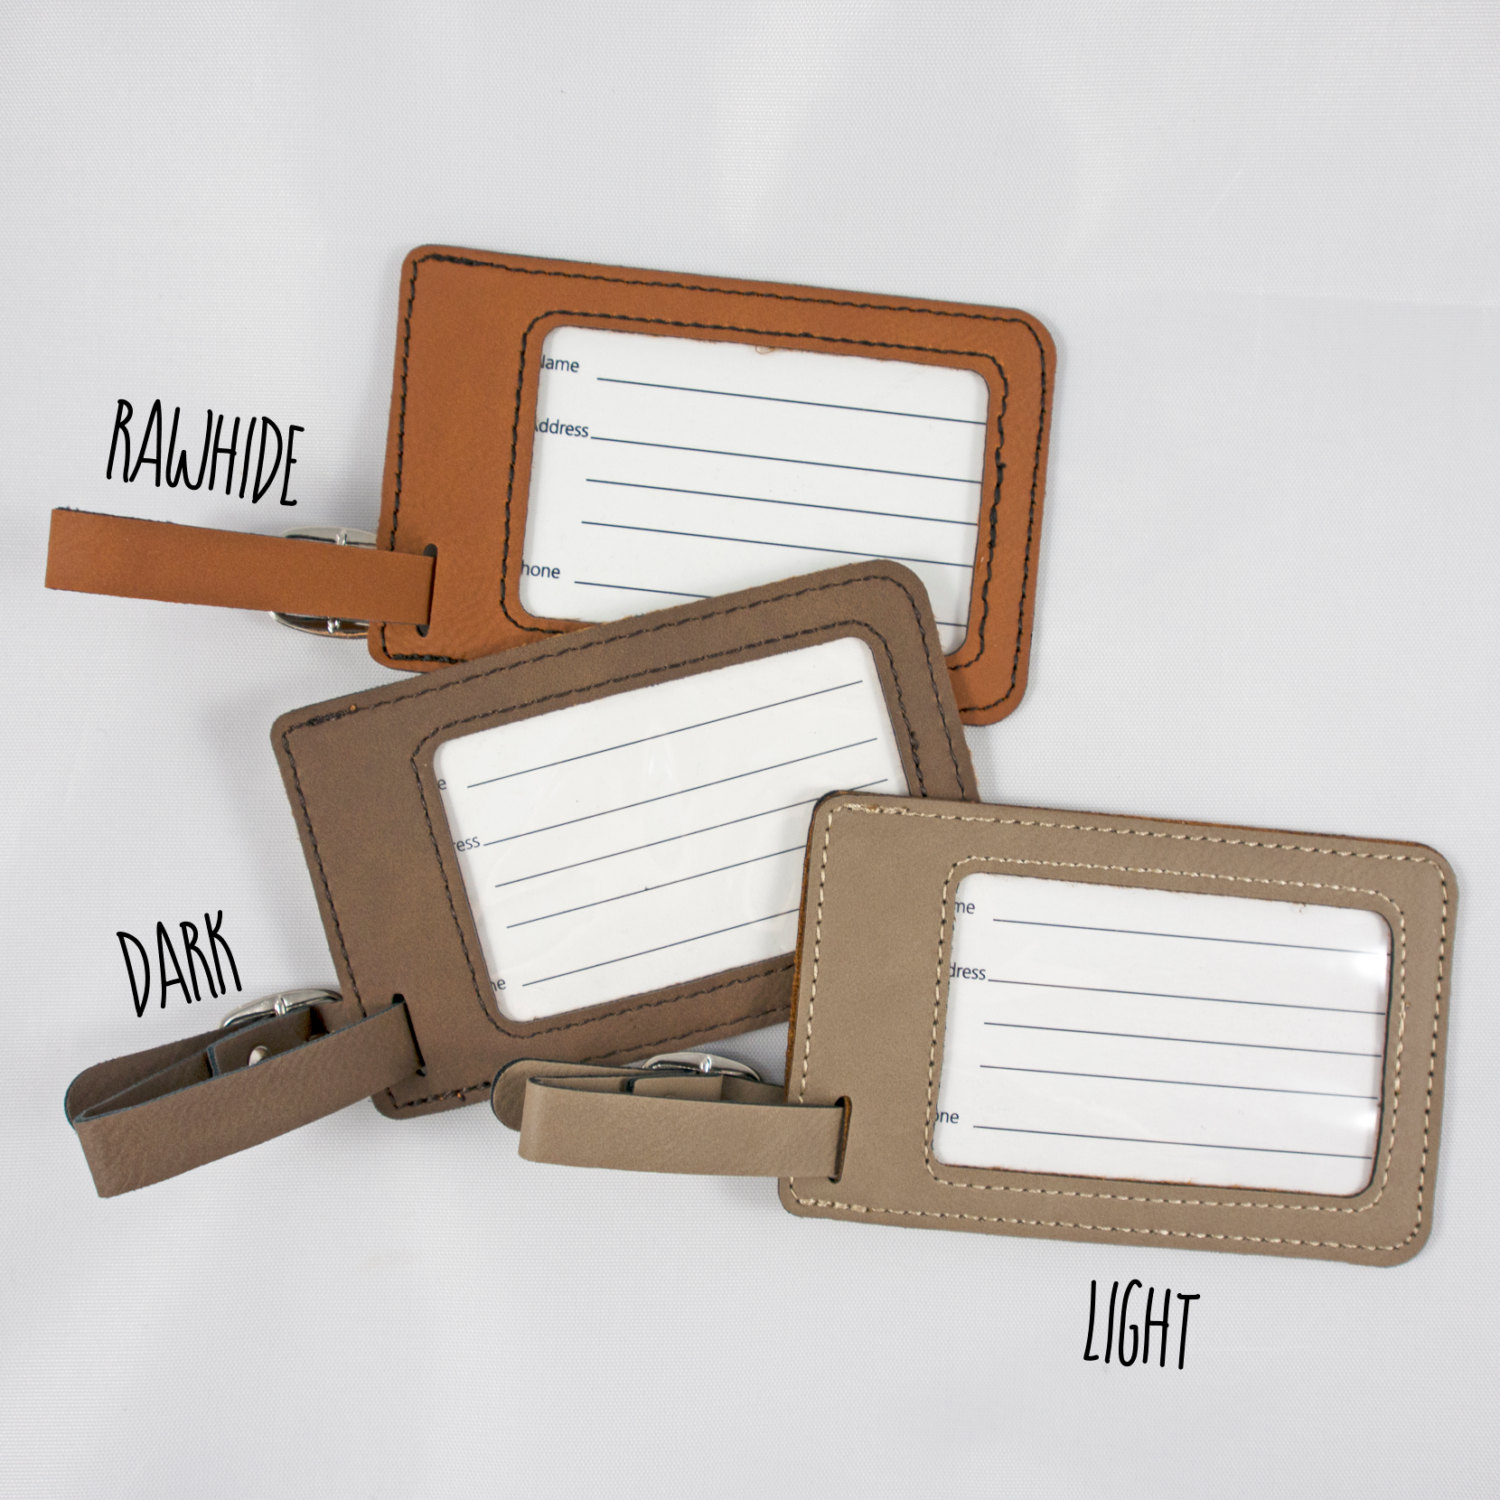 where to buy personalized luggage tags